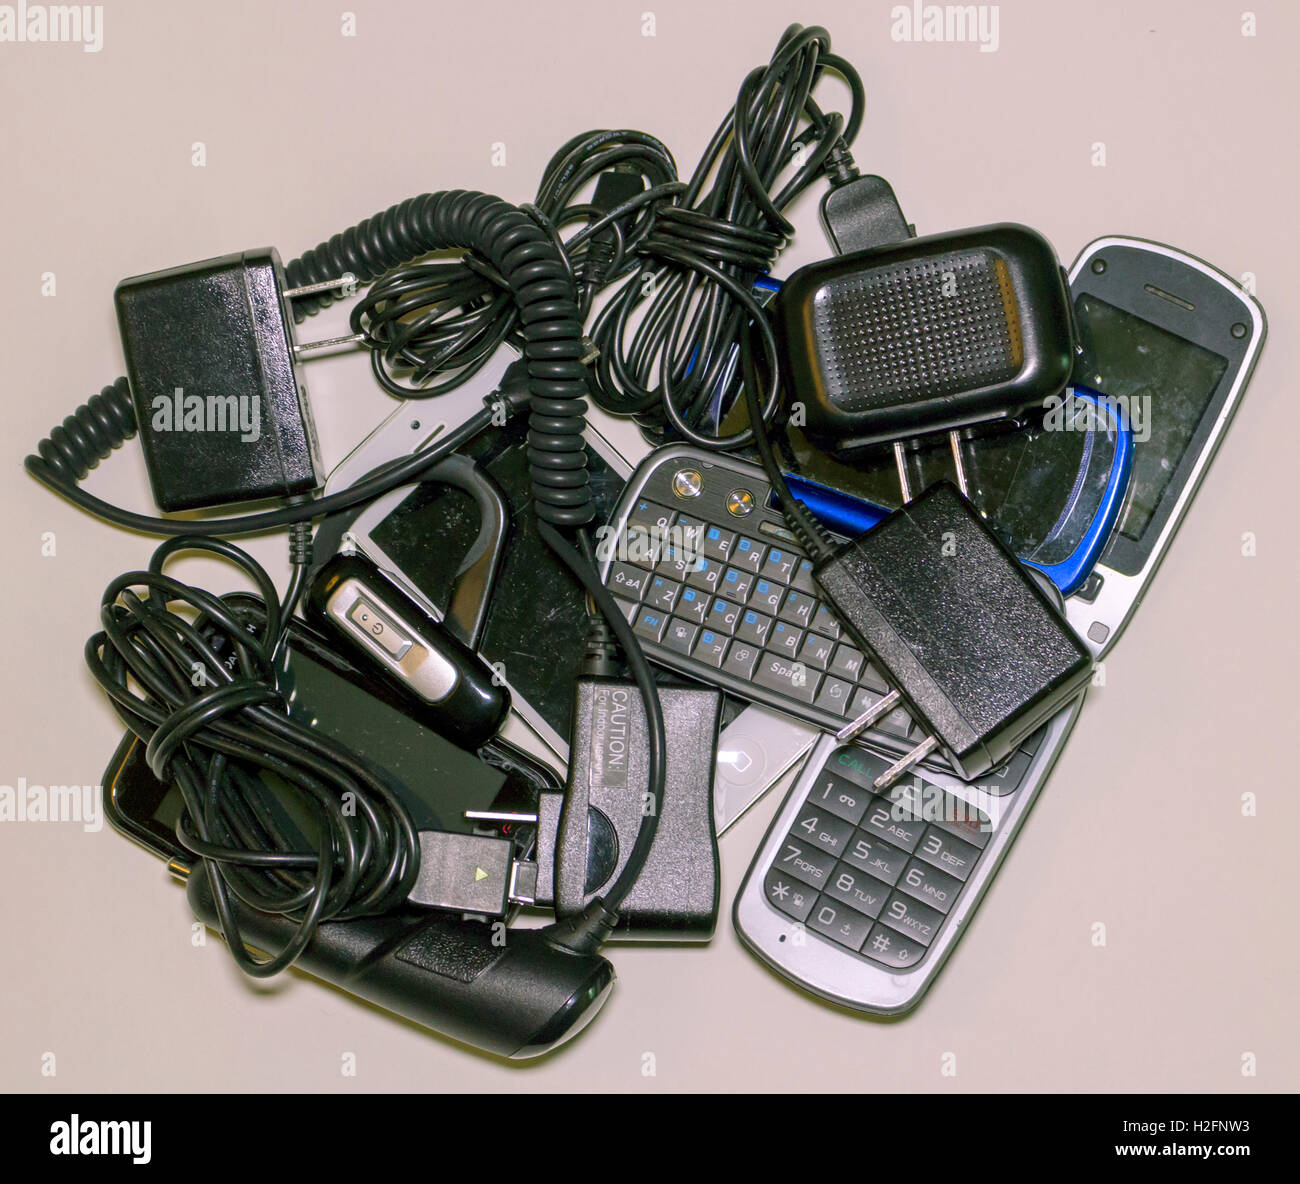 Pile of old mobile phones. Stock Photo